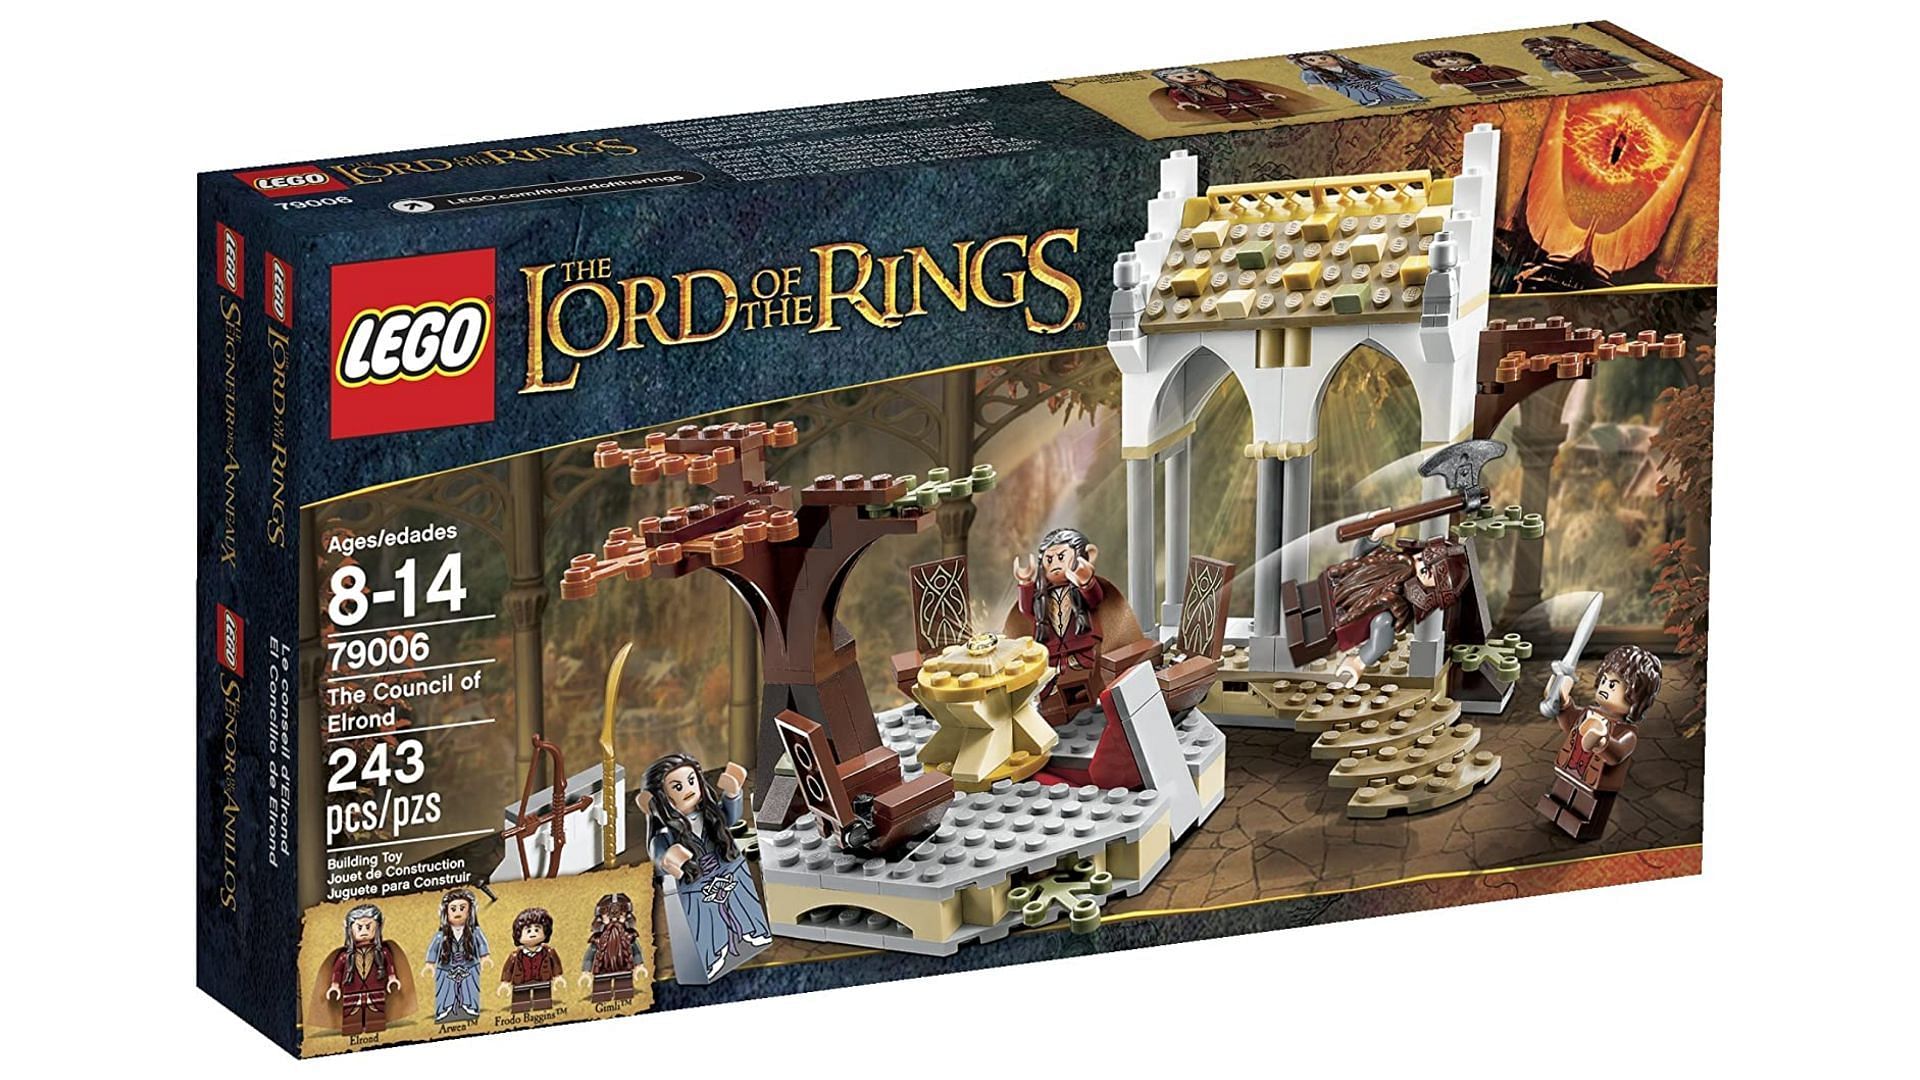 Lego Rivendell set Release date, where to buy, features, price, and more